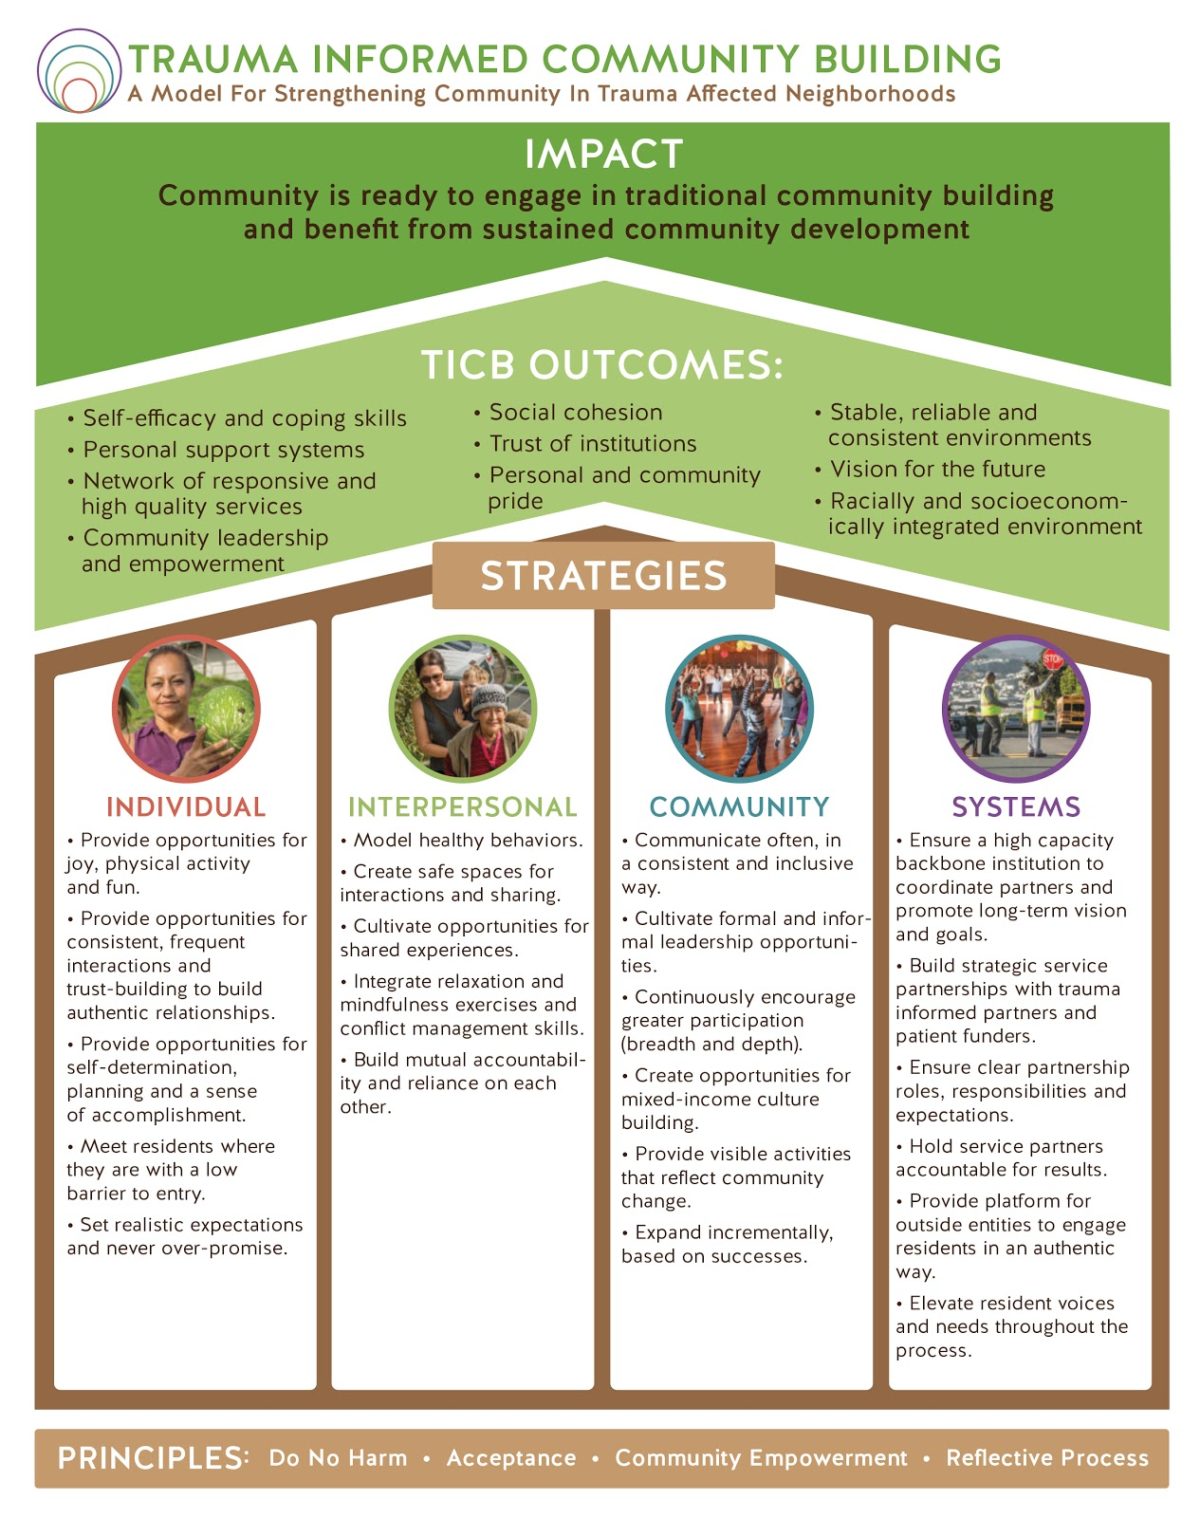 This illustration of the Trauma Informed Community Building Model does not outline a set of prescribed activities, but instead describes foundational principles and strategies that can be adapted to meet the specific needs and challenges in a given community.